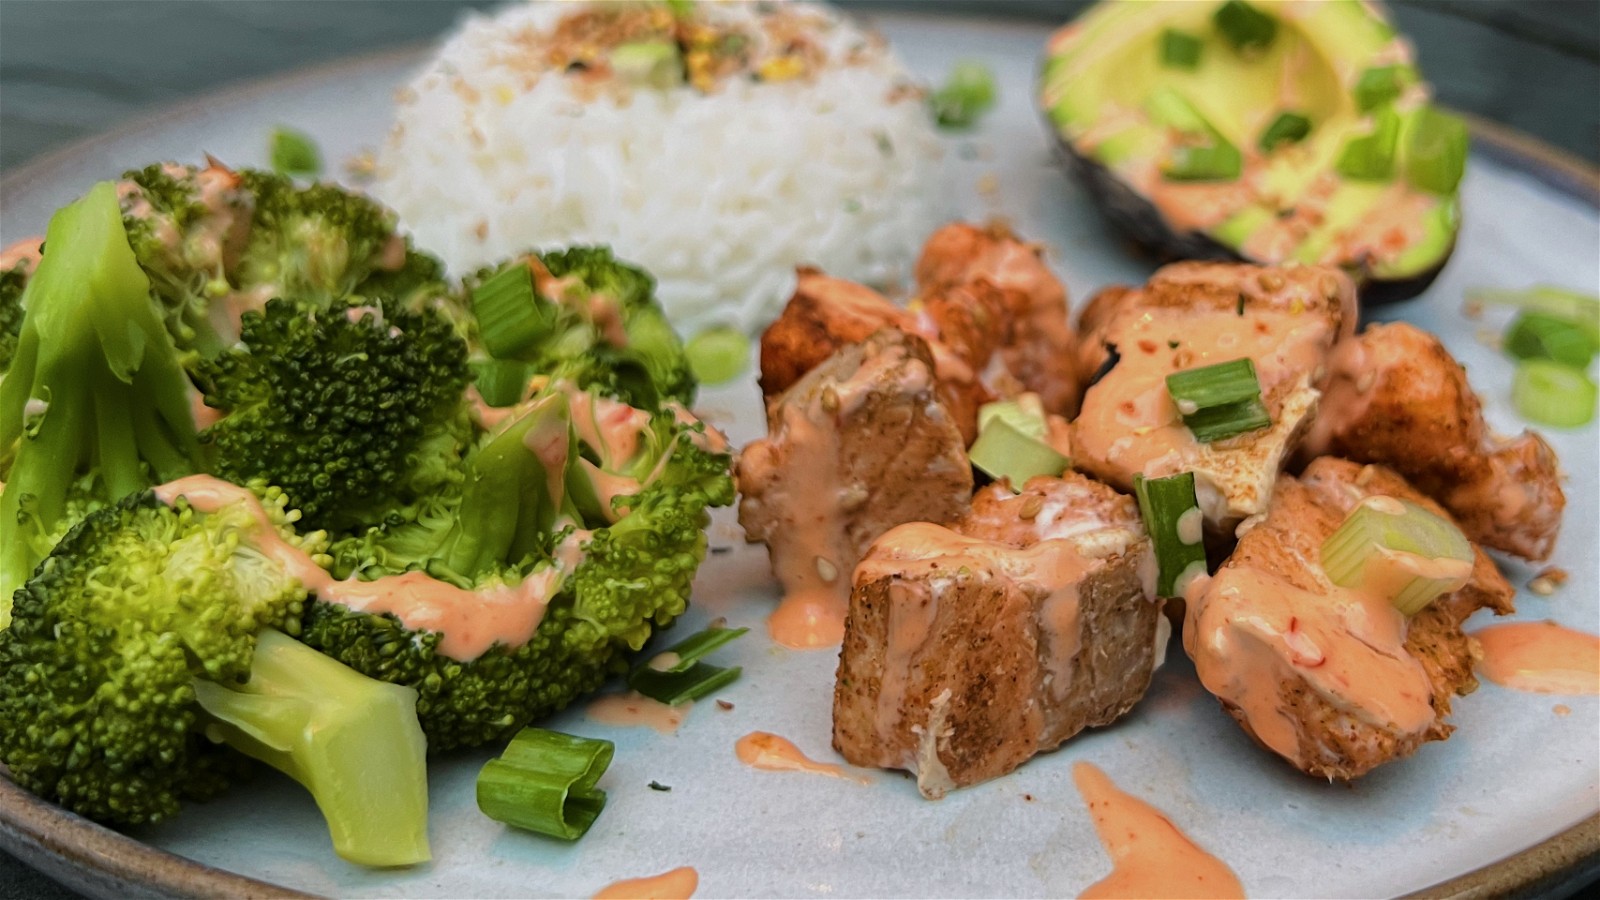 Image of Premier Catch Superfood Salmon Bowl